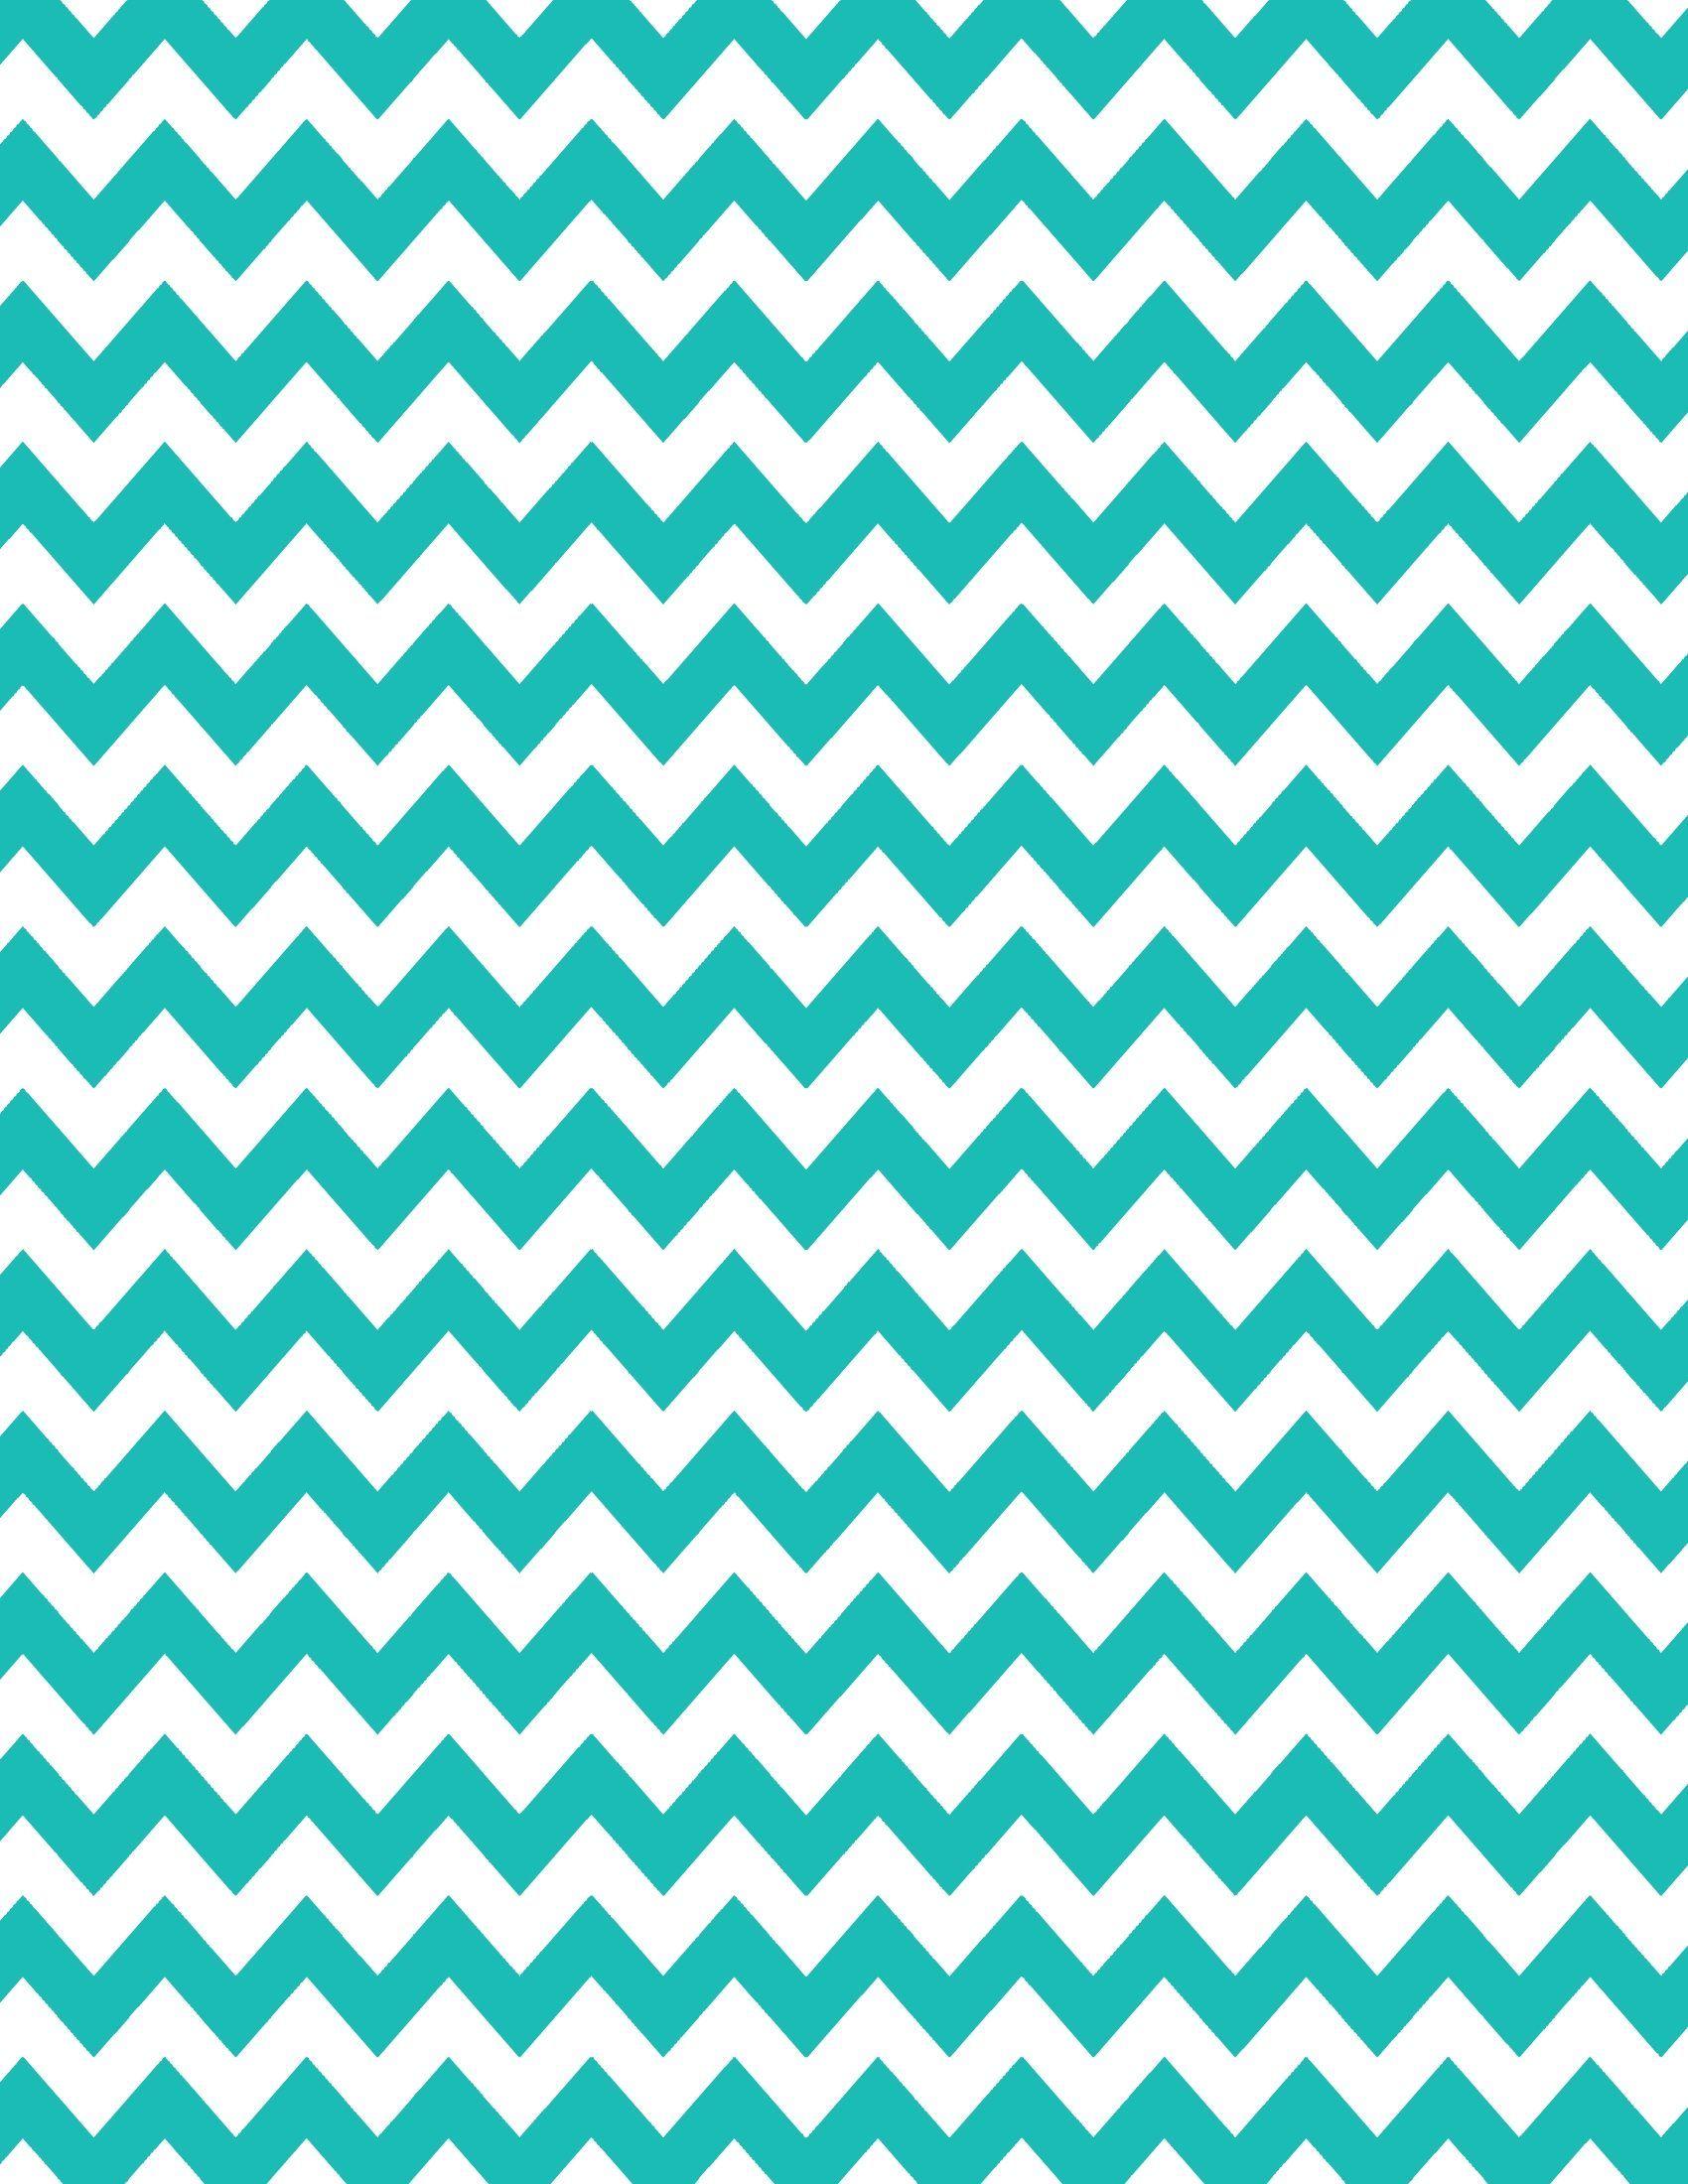 Free Chevron Background in Any Color